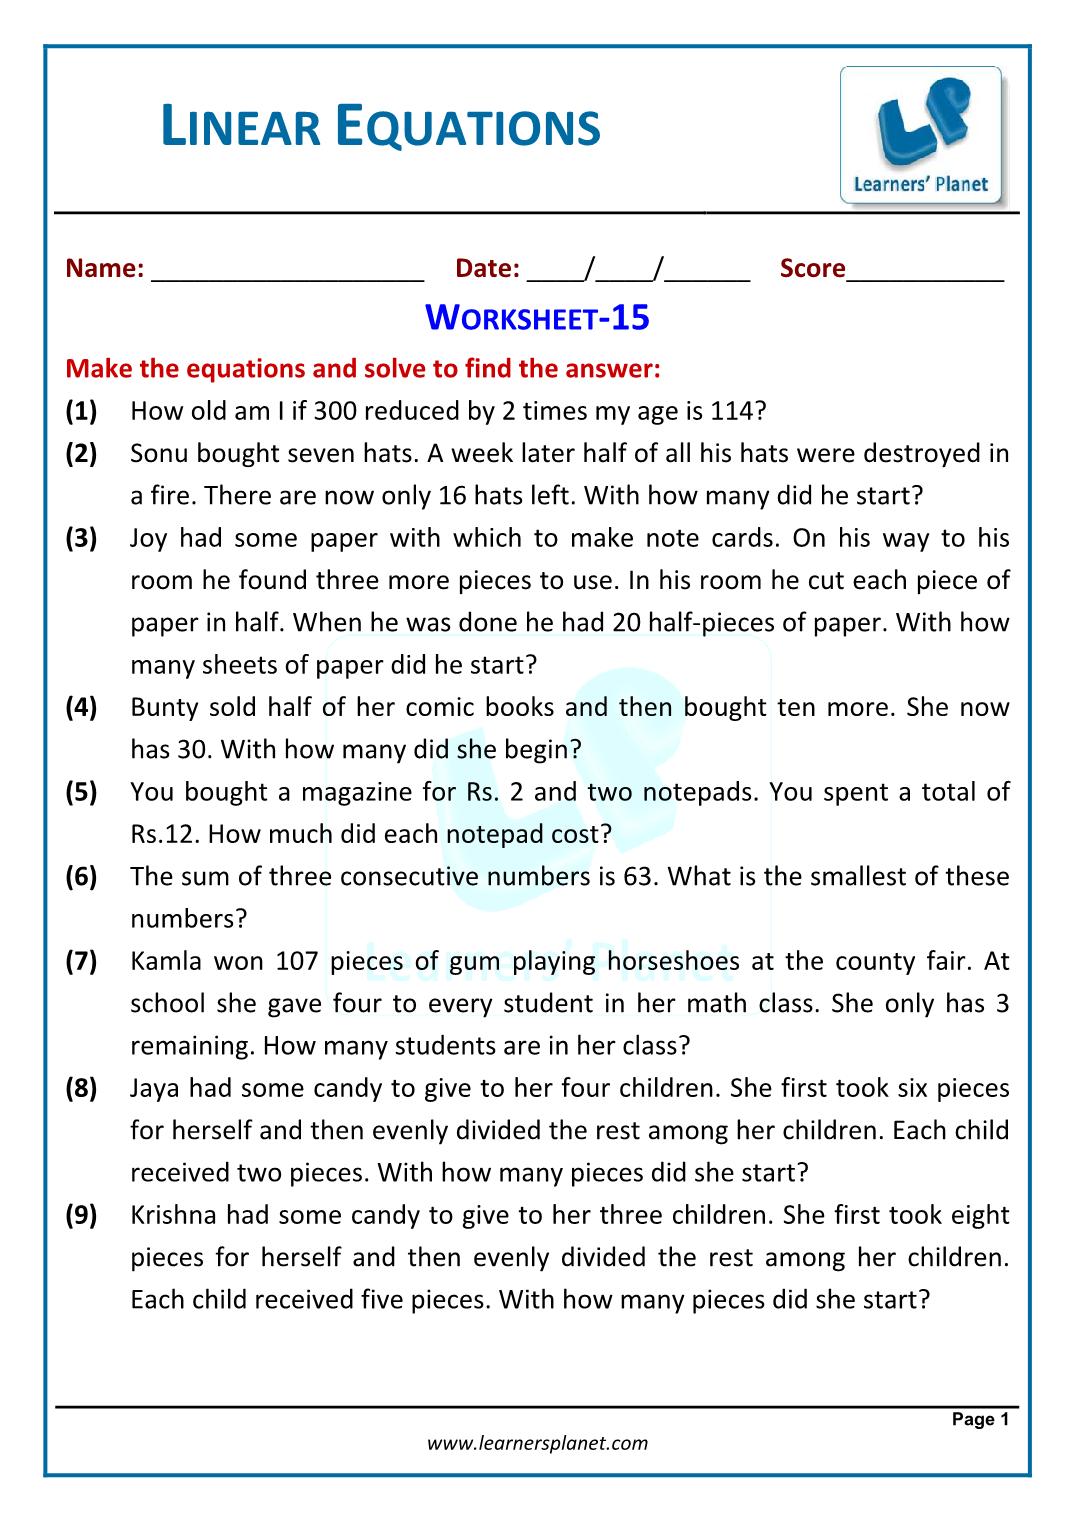 Linear equation word problems worksheet with answer Inside Linear Functions Word Problems Worksheet